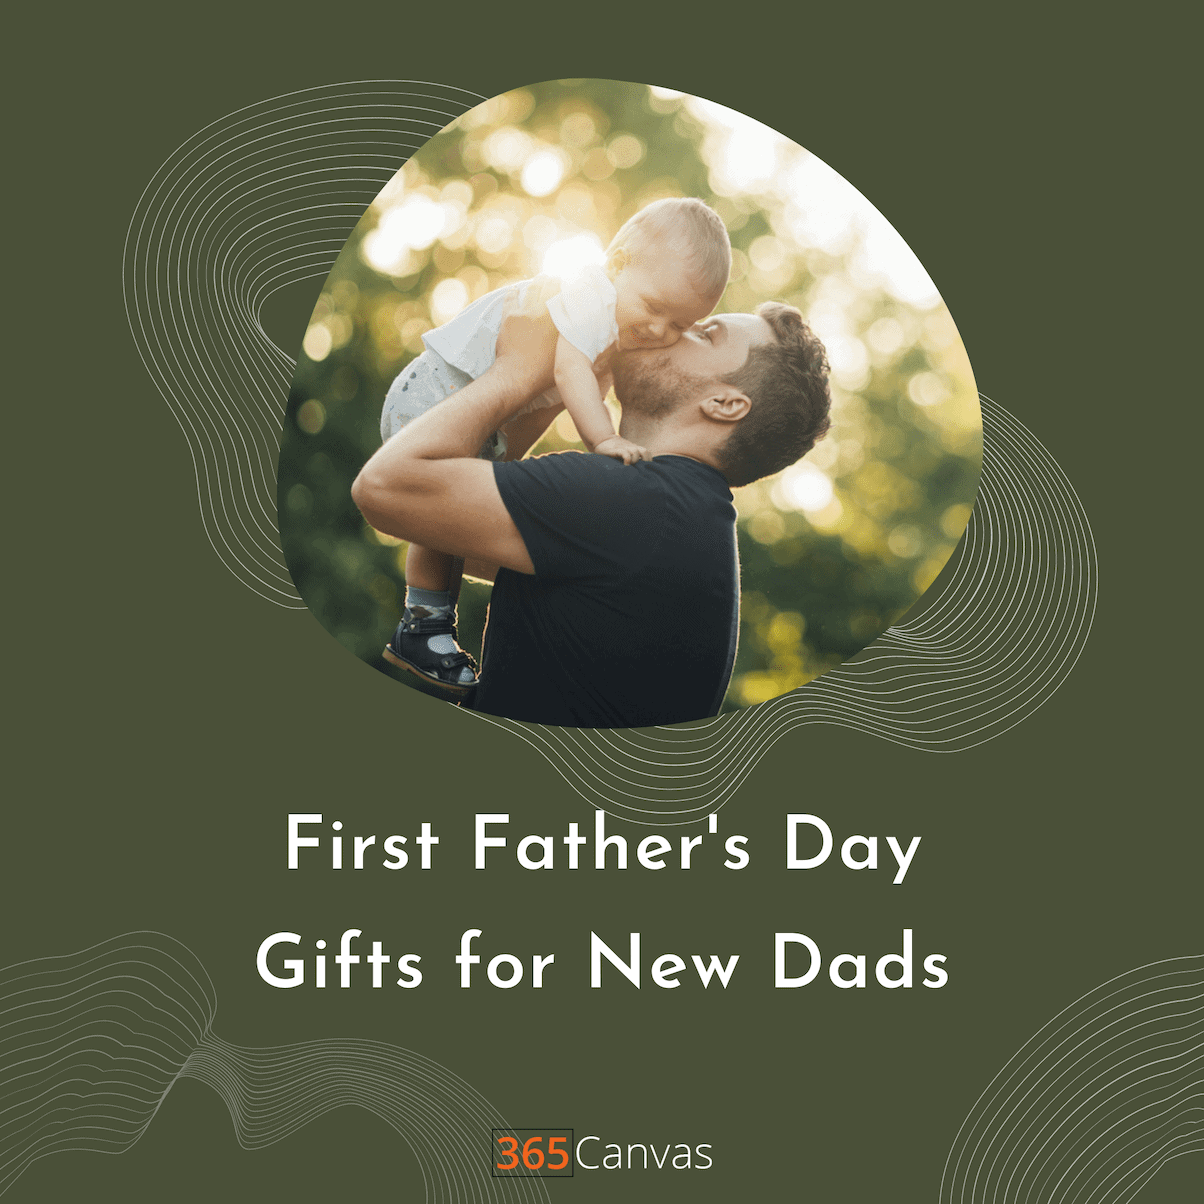 27 First Father S Day Gifts For Expectant And New Dads In 2021 365canvas Blog